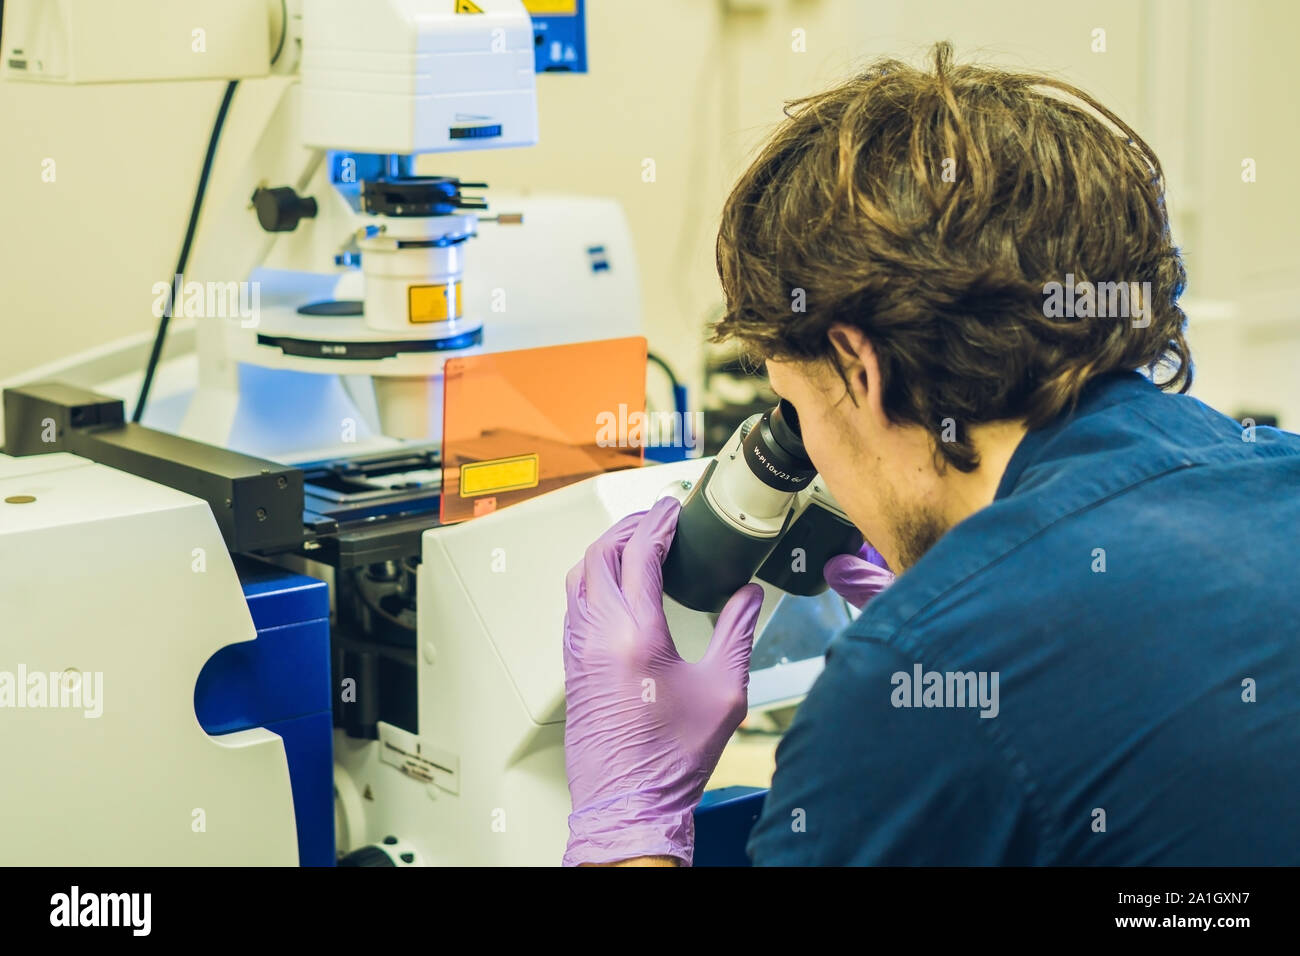 Scientist work on a confocal scanning microscope in a laboratory for biological samples investigation. Stock Photo